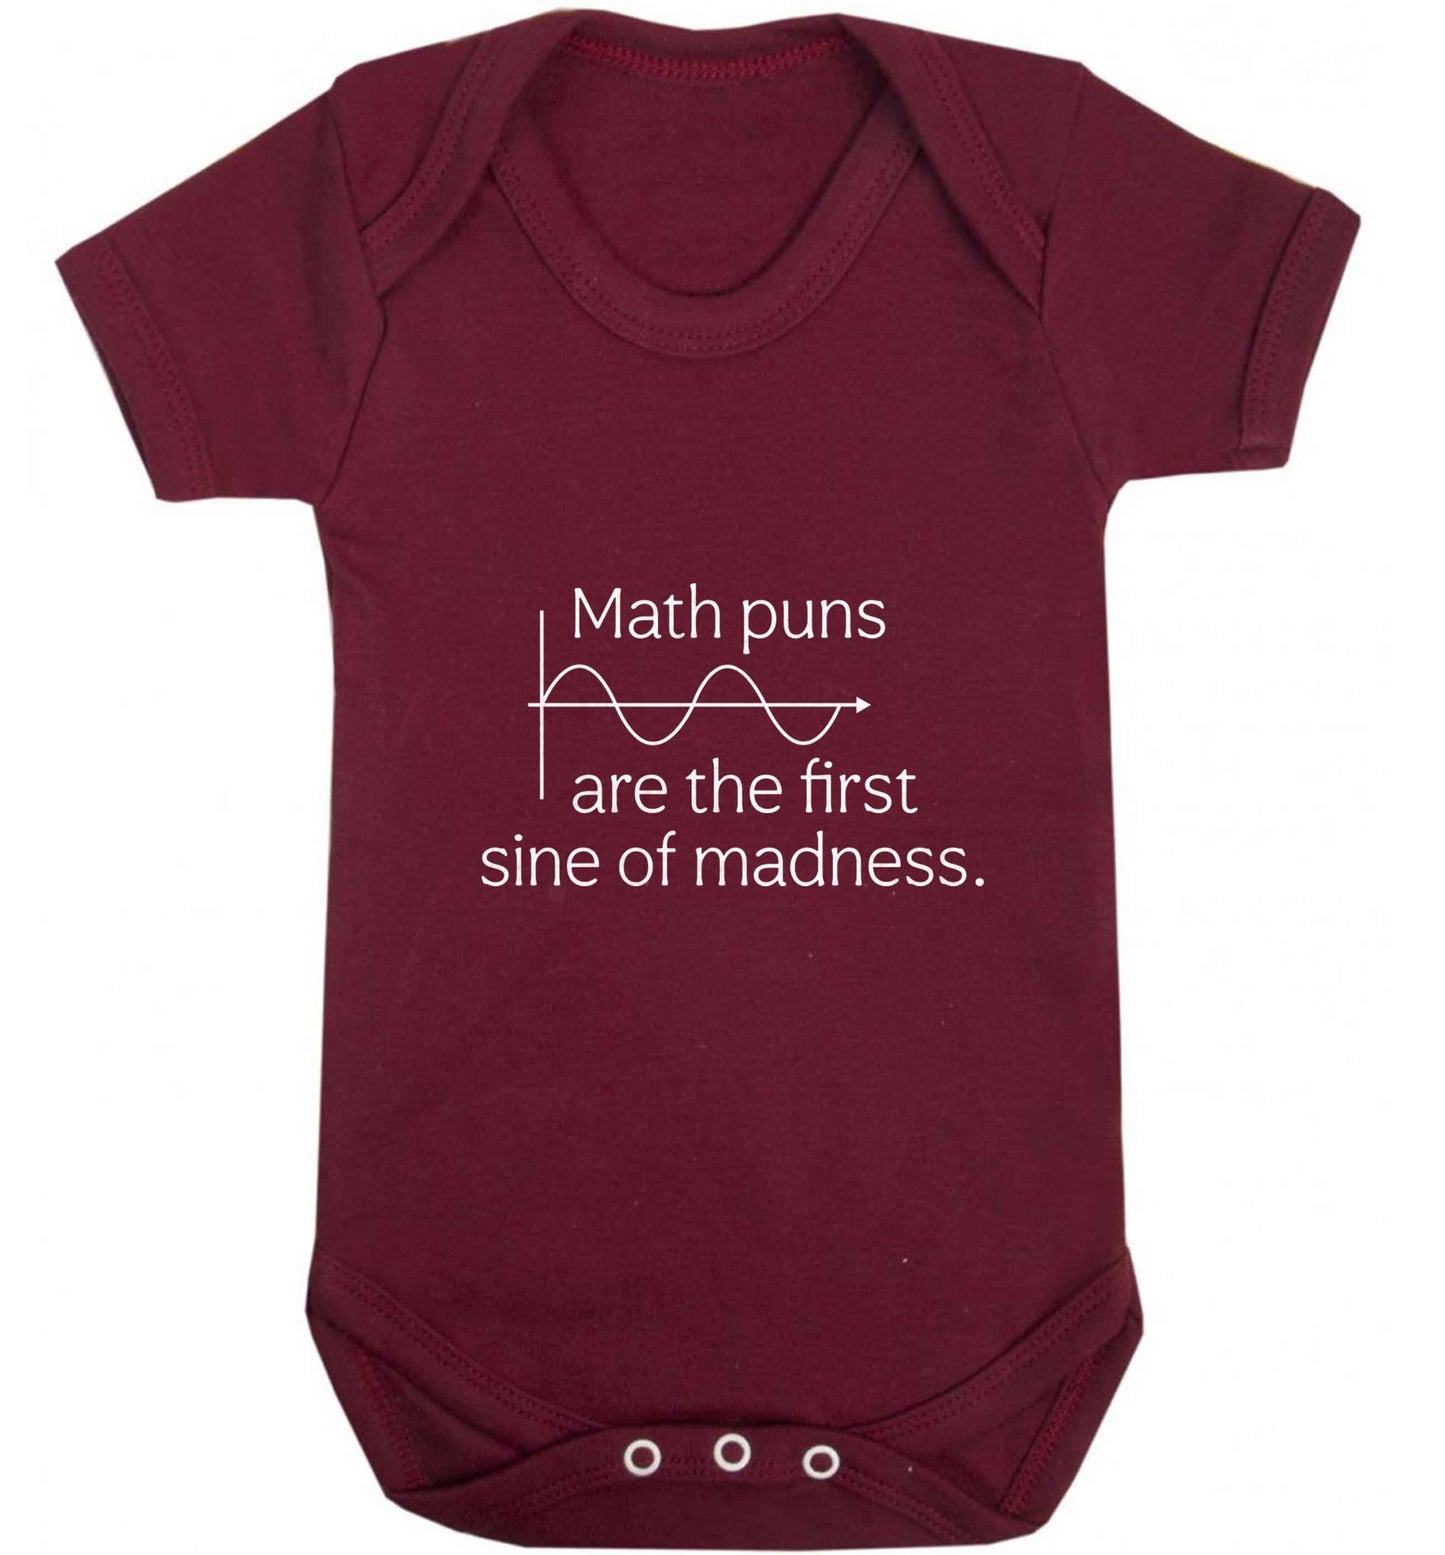 Math puns are the first sine of madness baby vest maroon 18-24 months